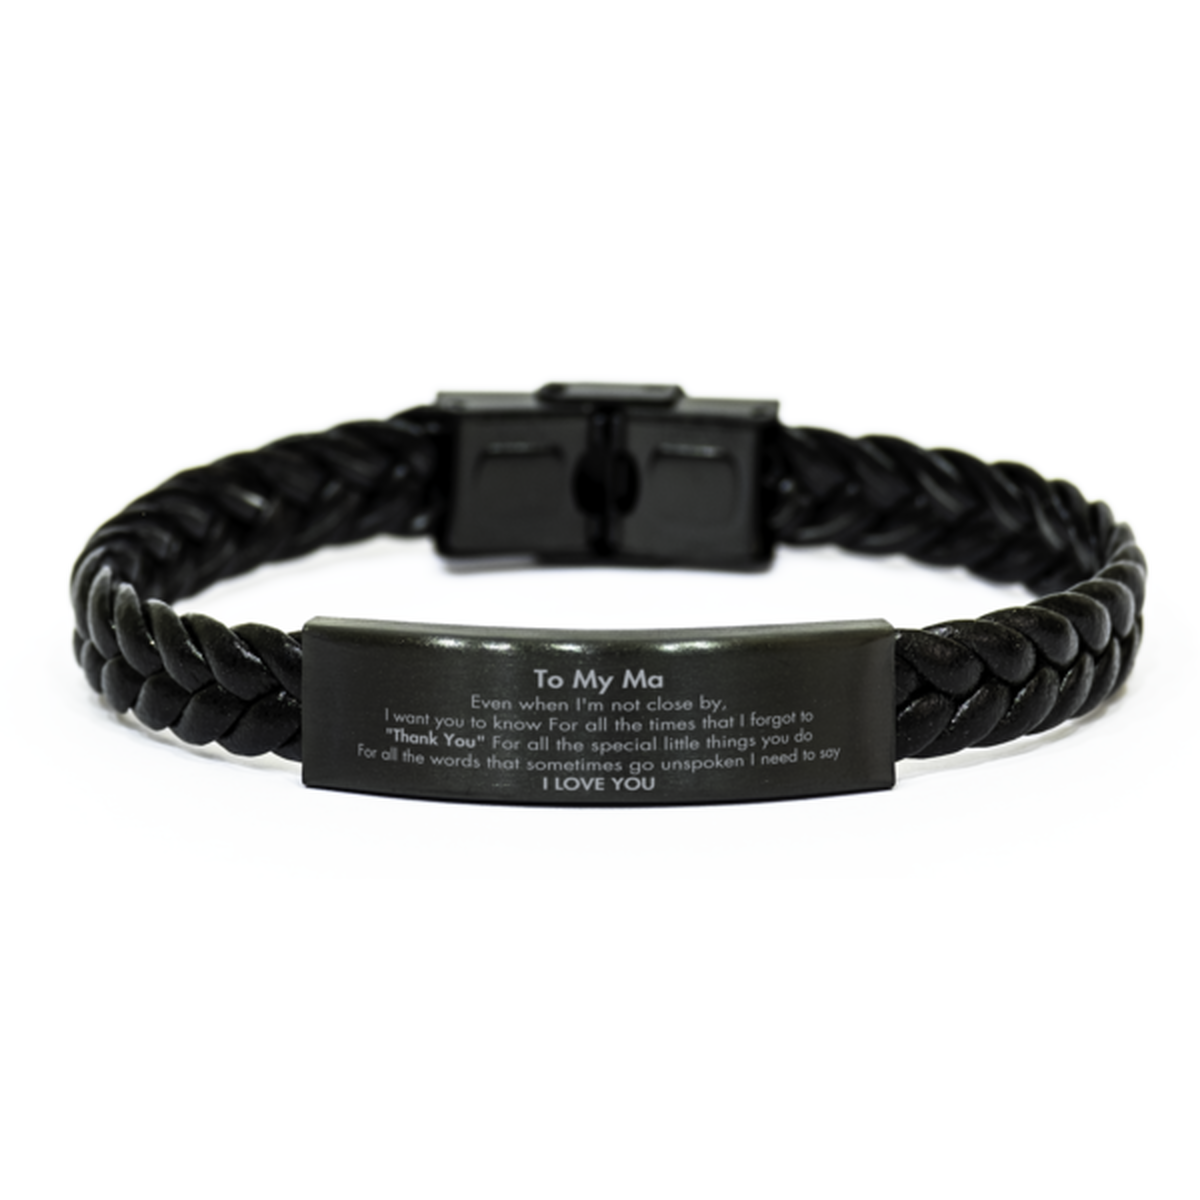 Thank You Gifts for Ma, Keepsake Braided Leather Bracelet Gifts for Ma Birthday Mother's day Father's Day Ma For all the words That sometimes go unspoken I need to say I LOVE YOU